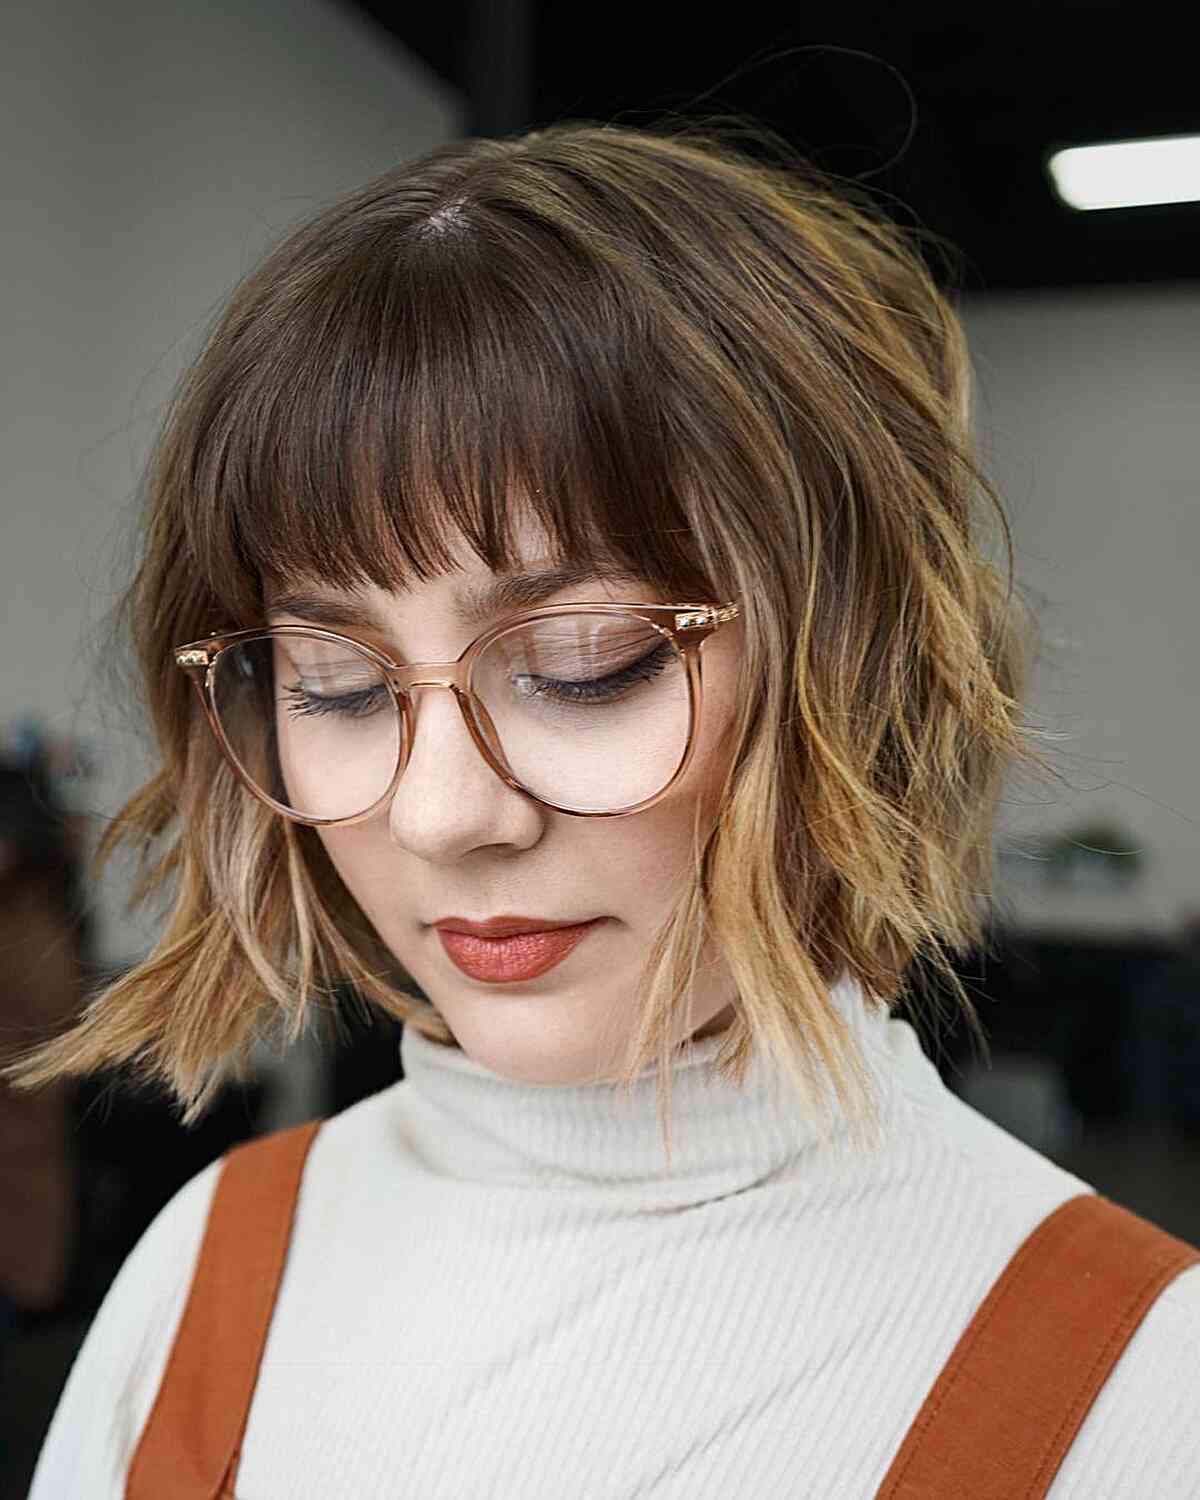 Beach-Inspired Textured Choppy Bob with Fringe for girls with glasses and ombre